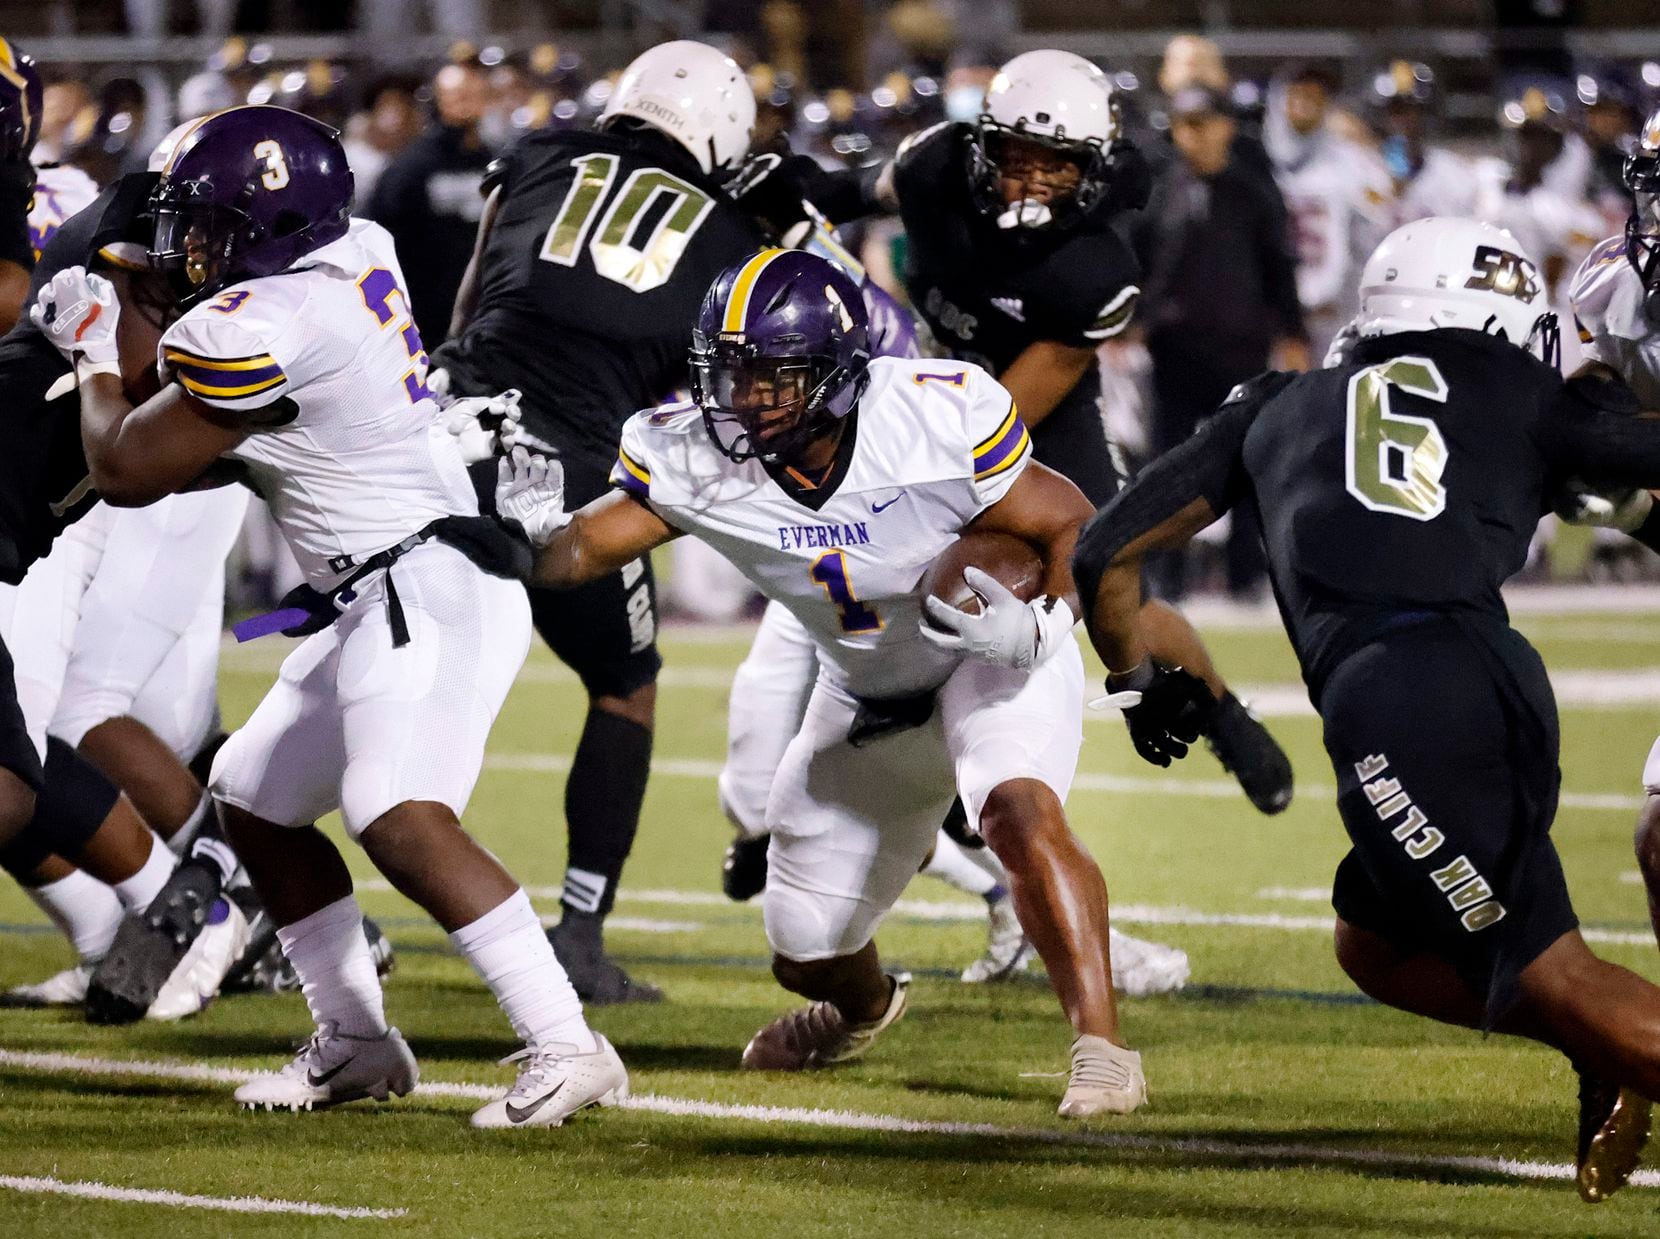 Everman running back Errick Mills takes a direct snap and makes his way through the South...